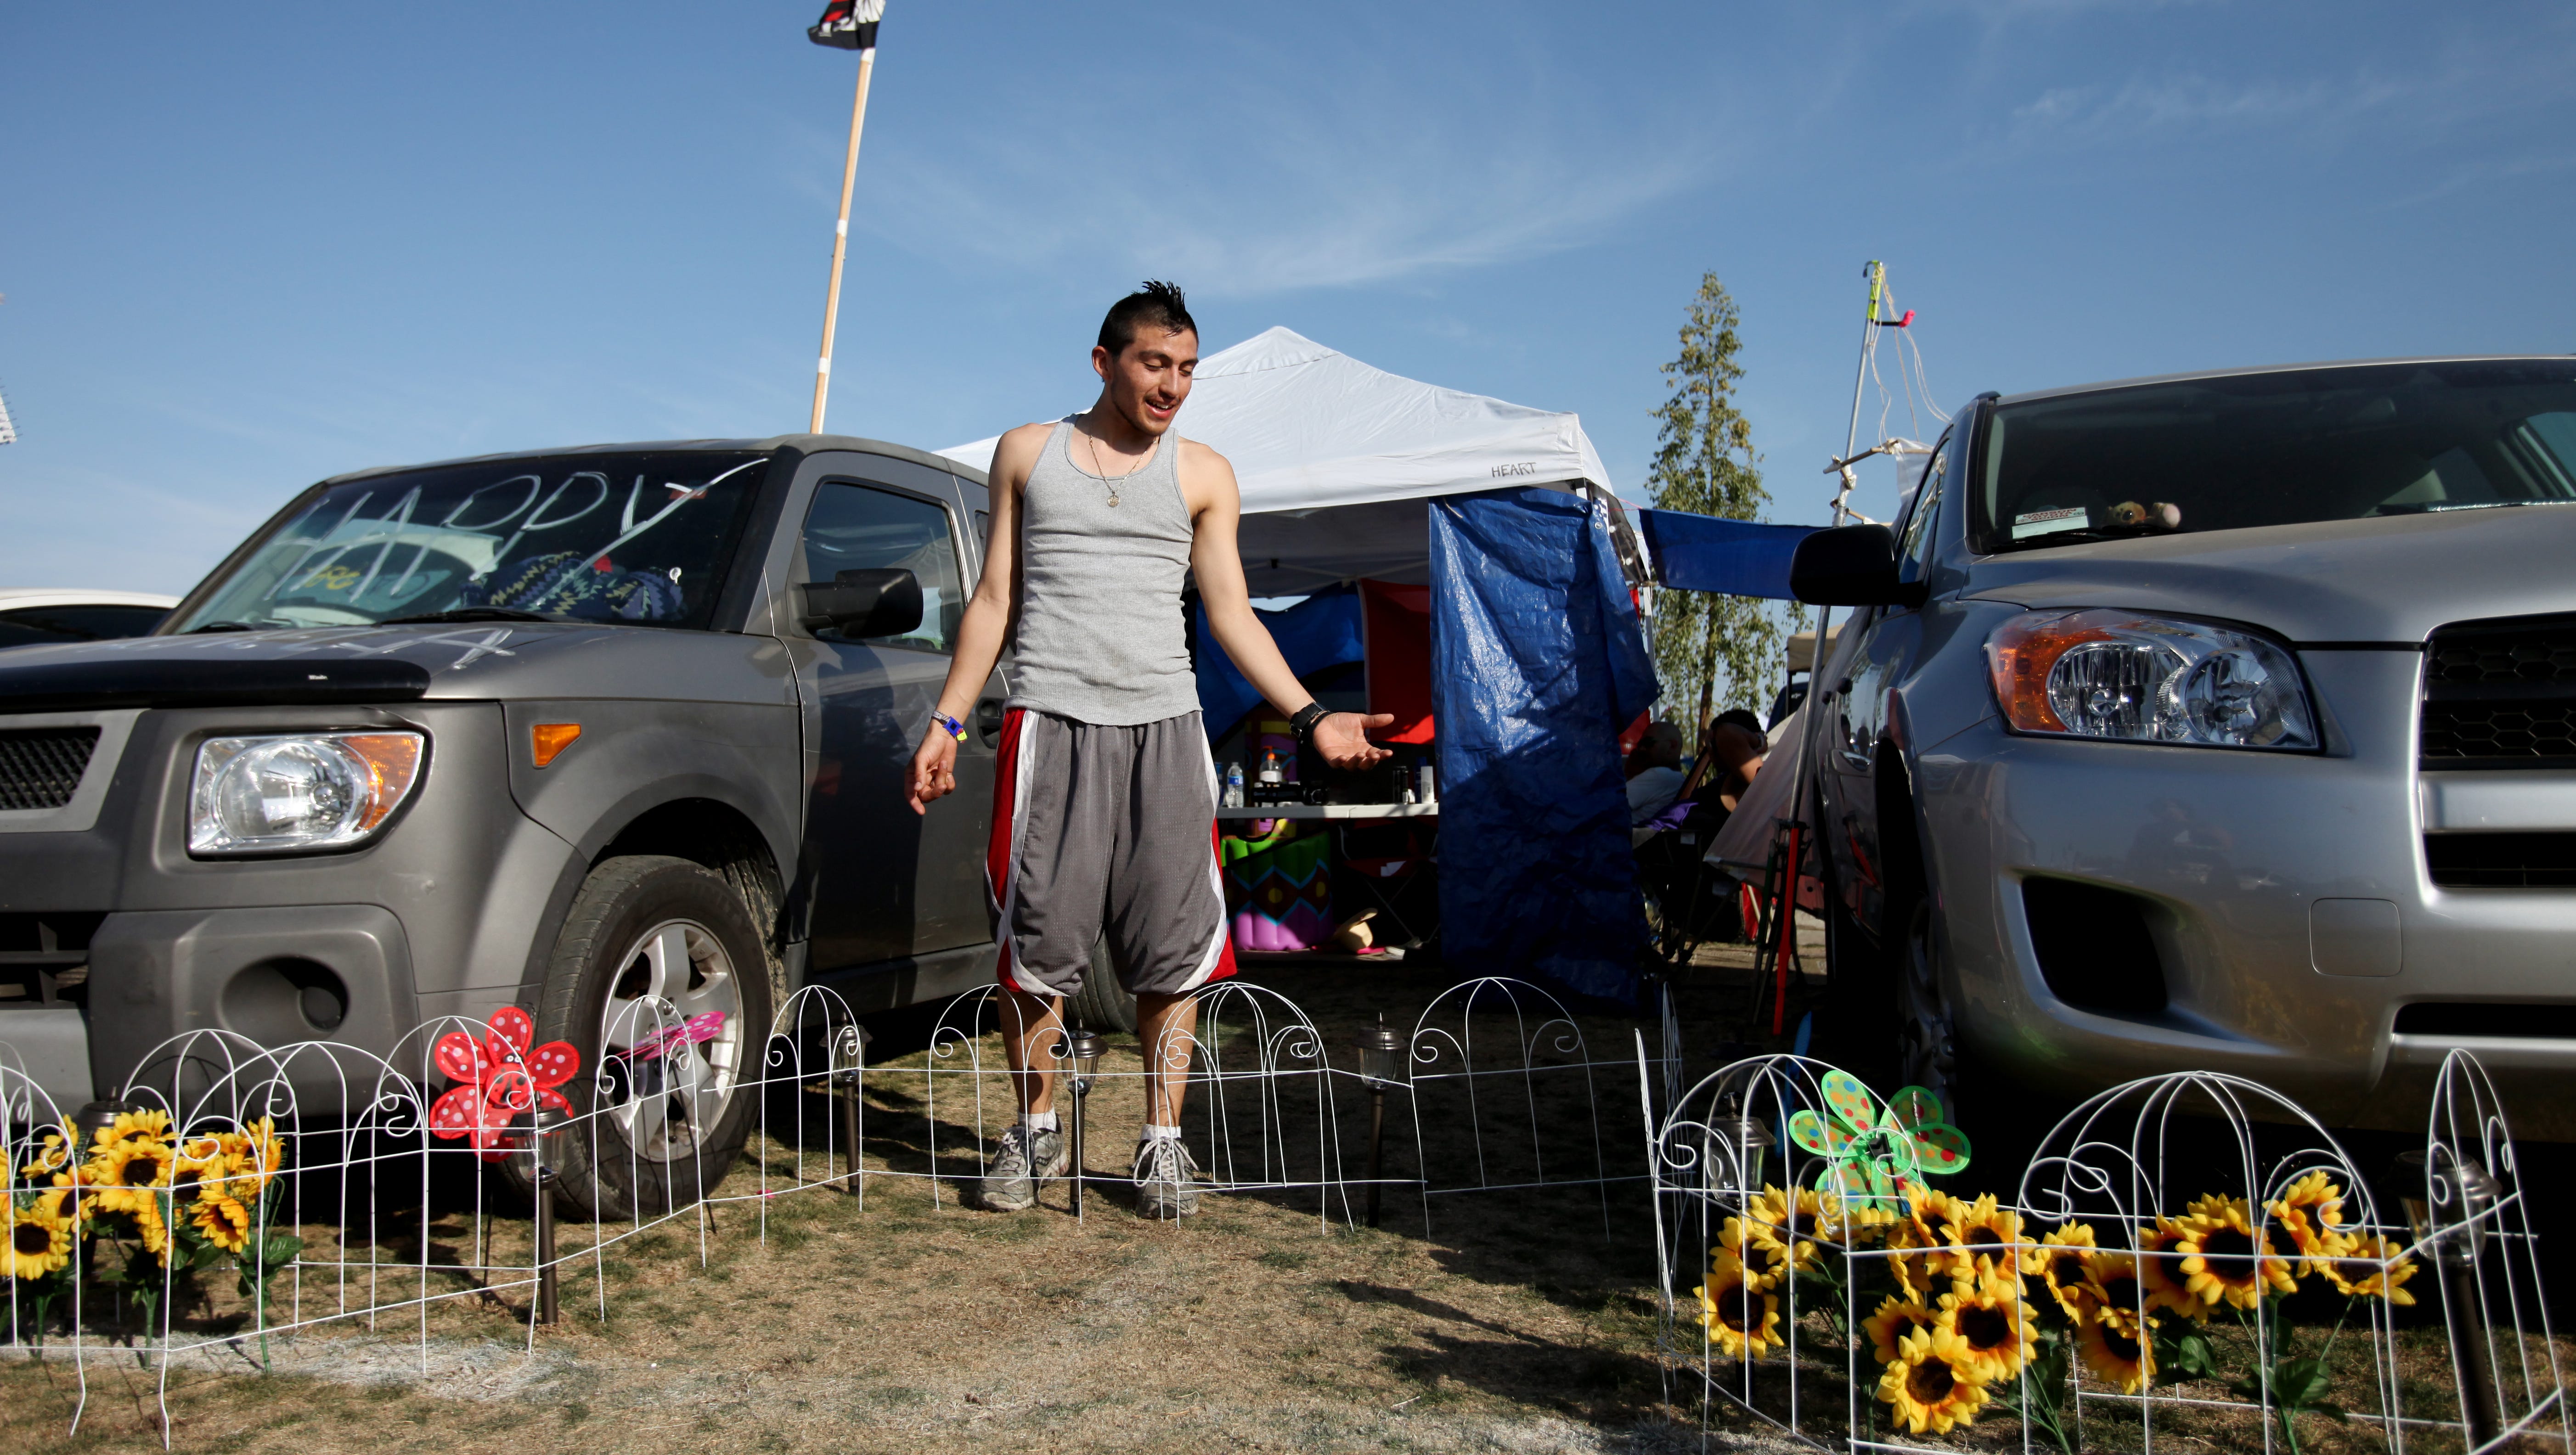 Camping at Coachella? 5 tips to make your life easier